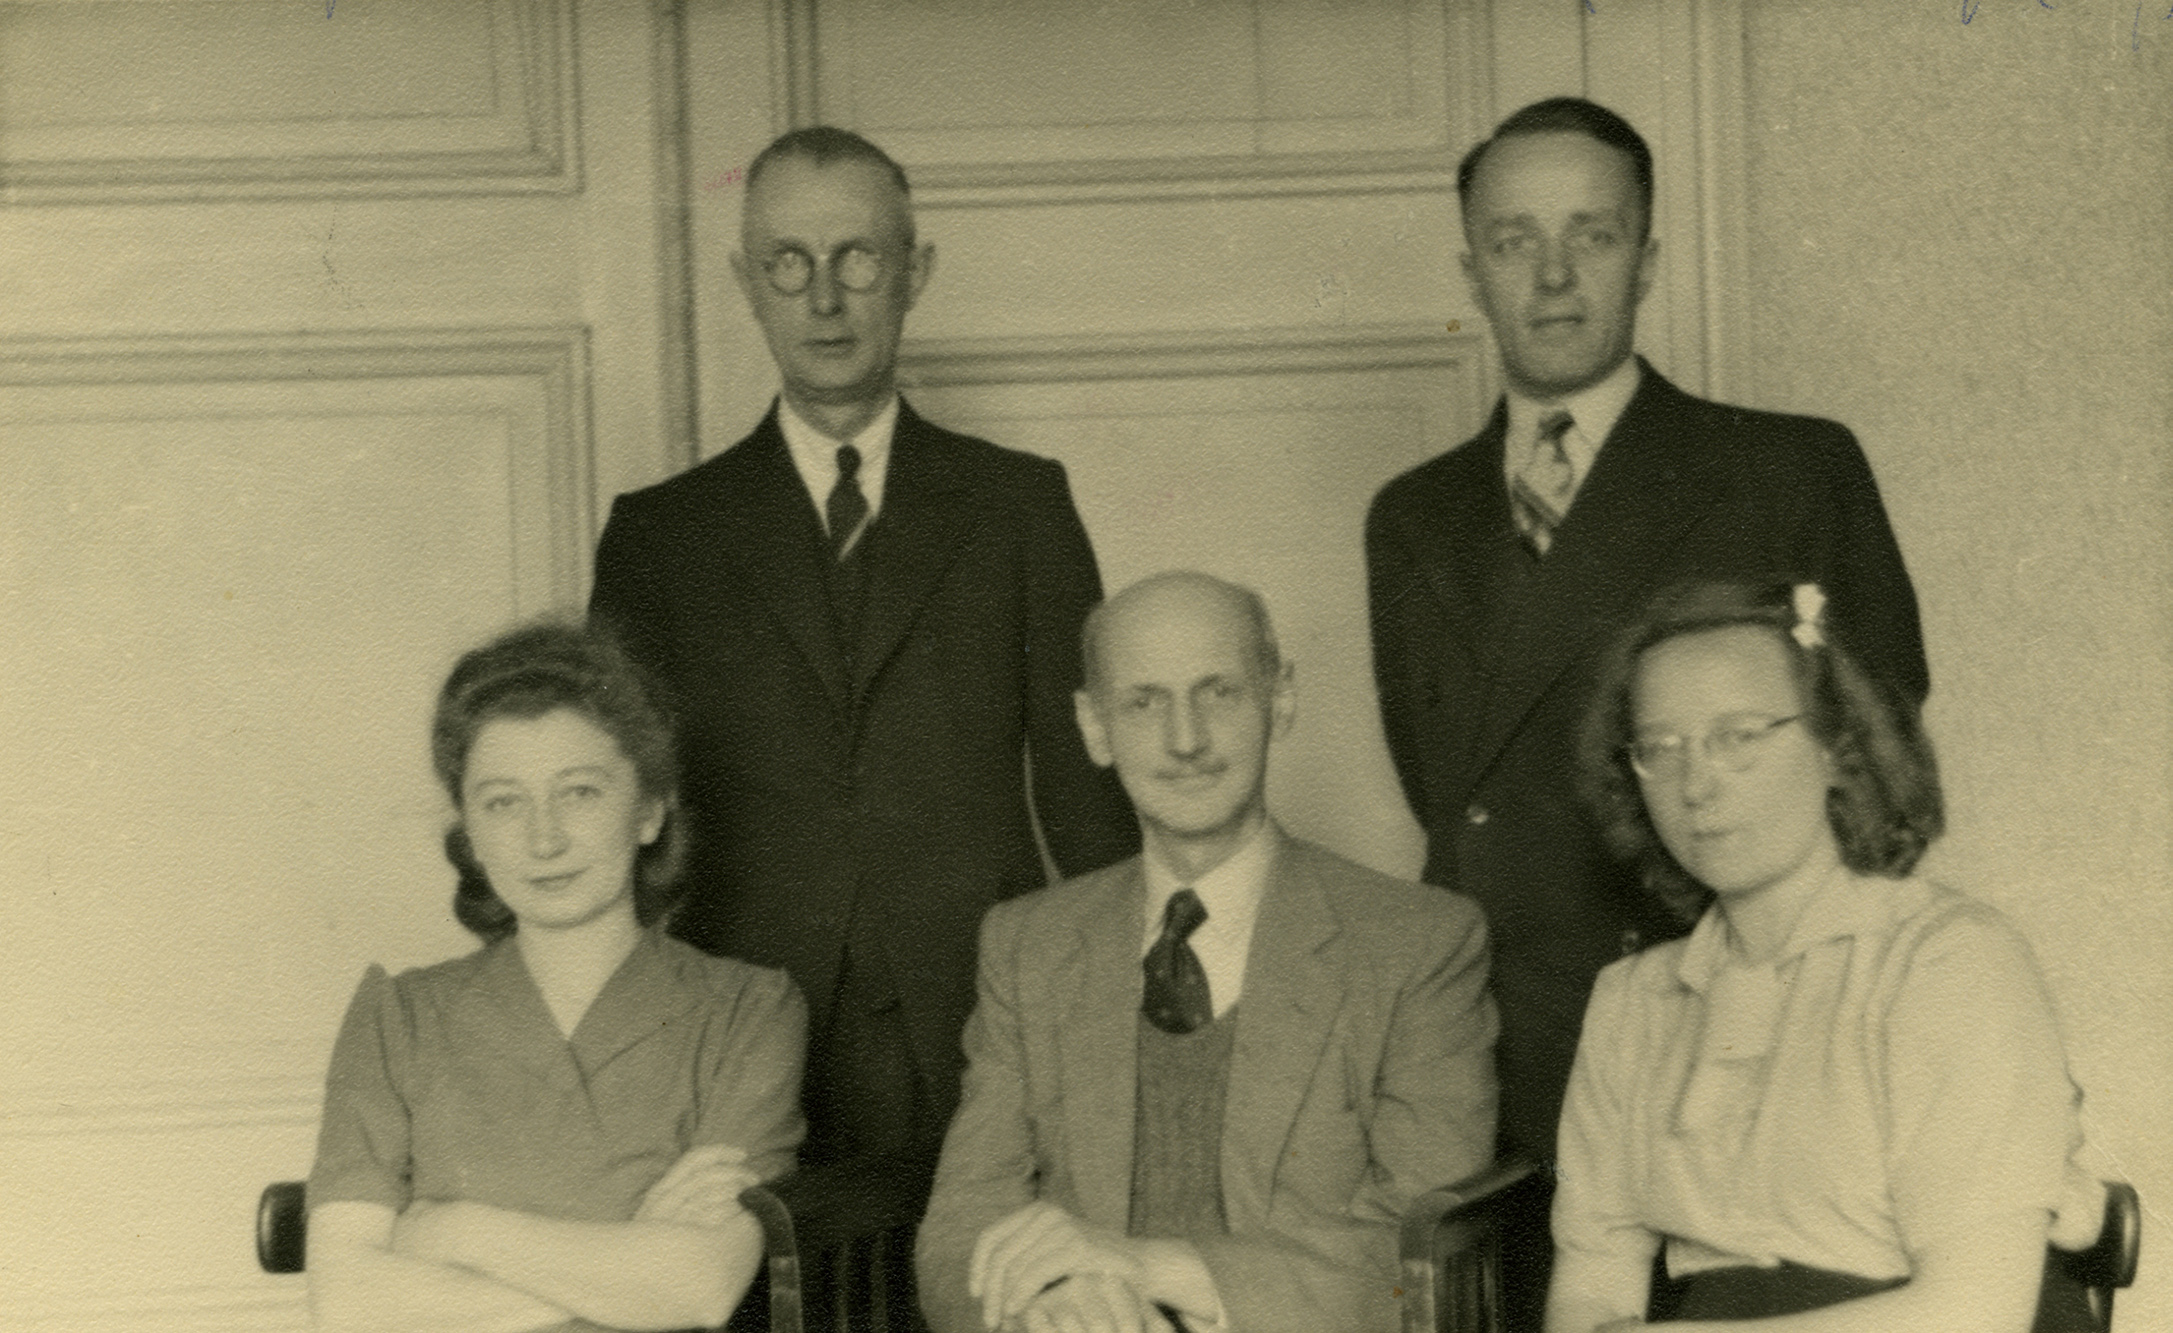 Otto Frank (in the middle) with the helpers (from left to right) Miep Gies, Jo Kleiman, Victor Kugler, and Bep Voskuijl, August 1945.